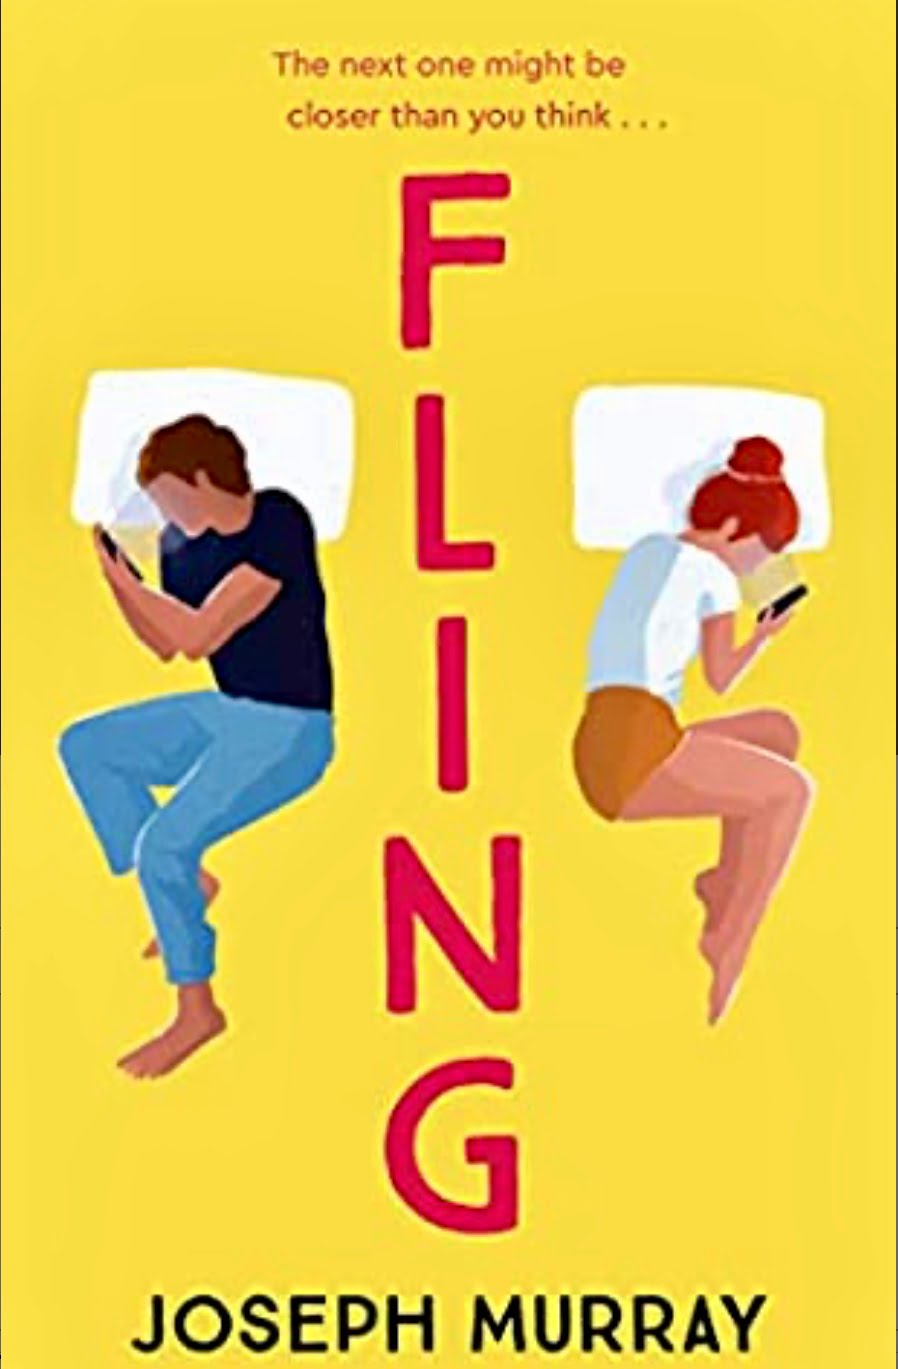 FLING BY JOSEPH MURRAY – BOOK REVIEW